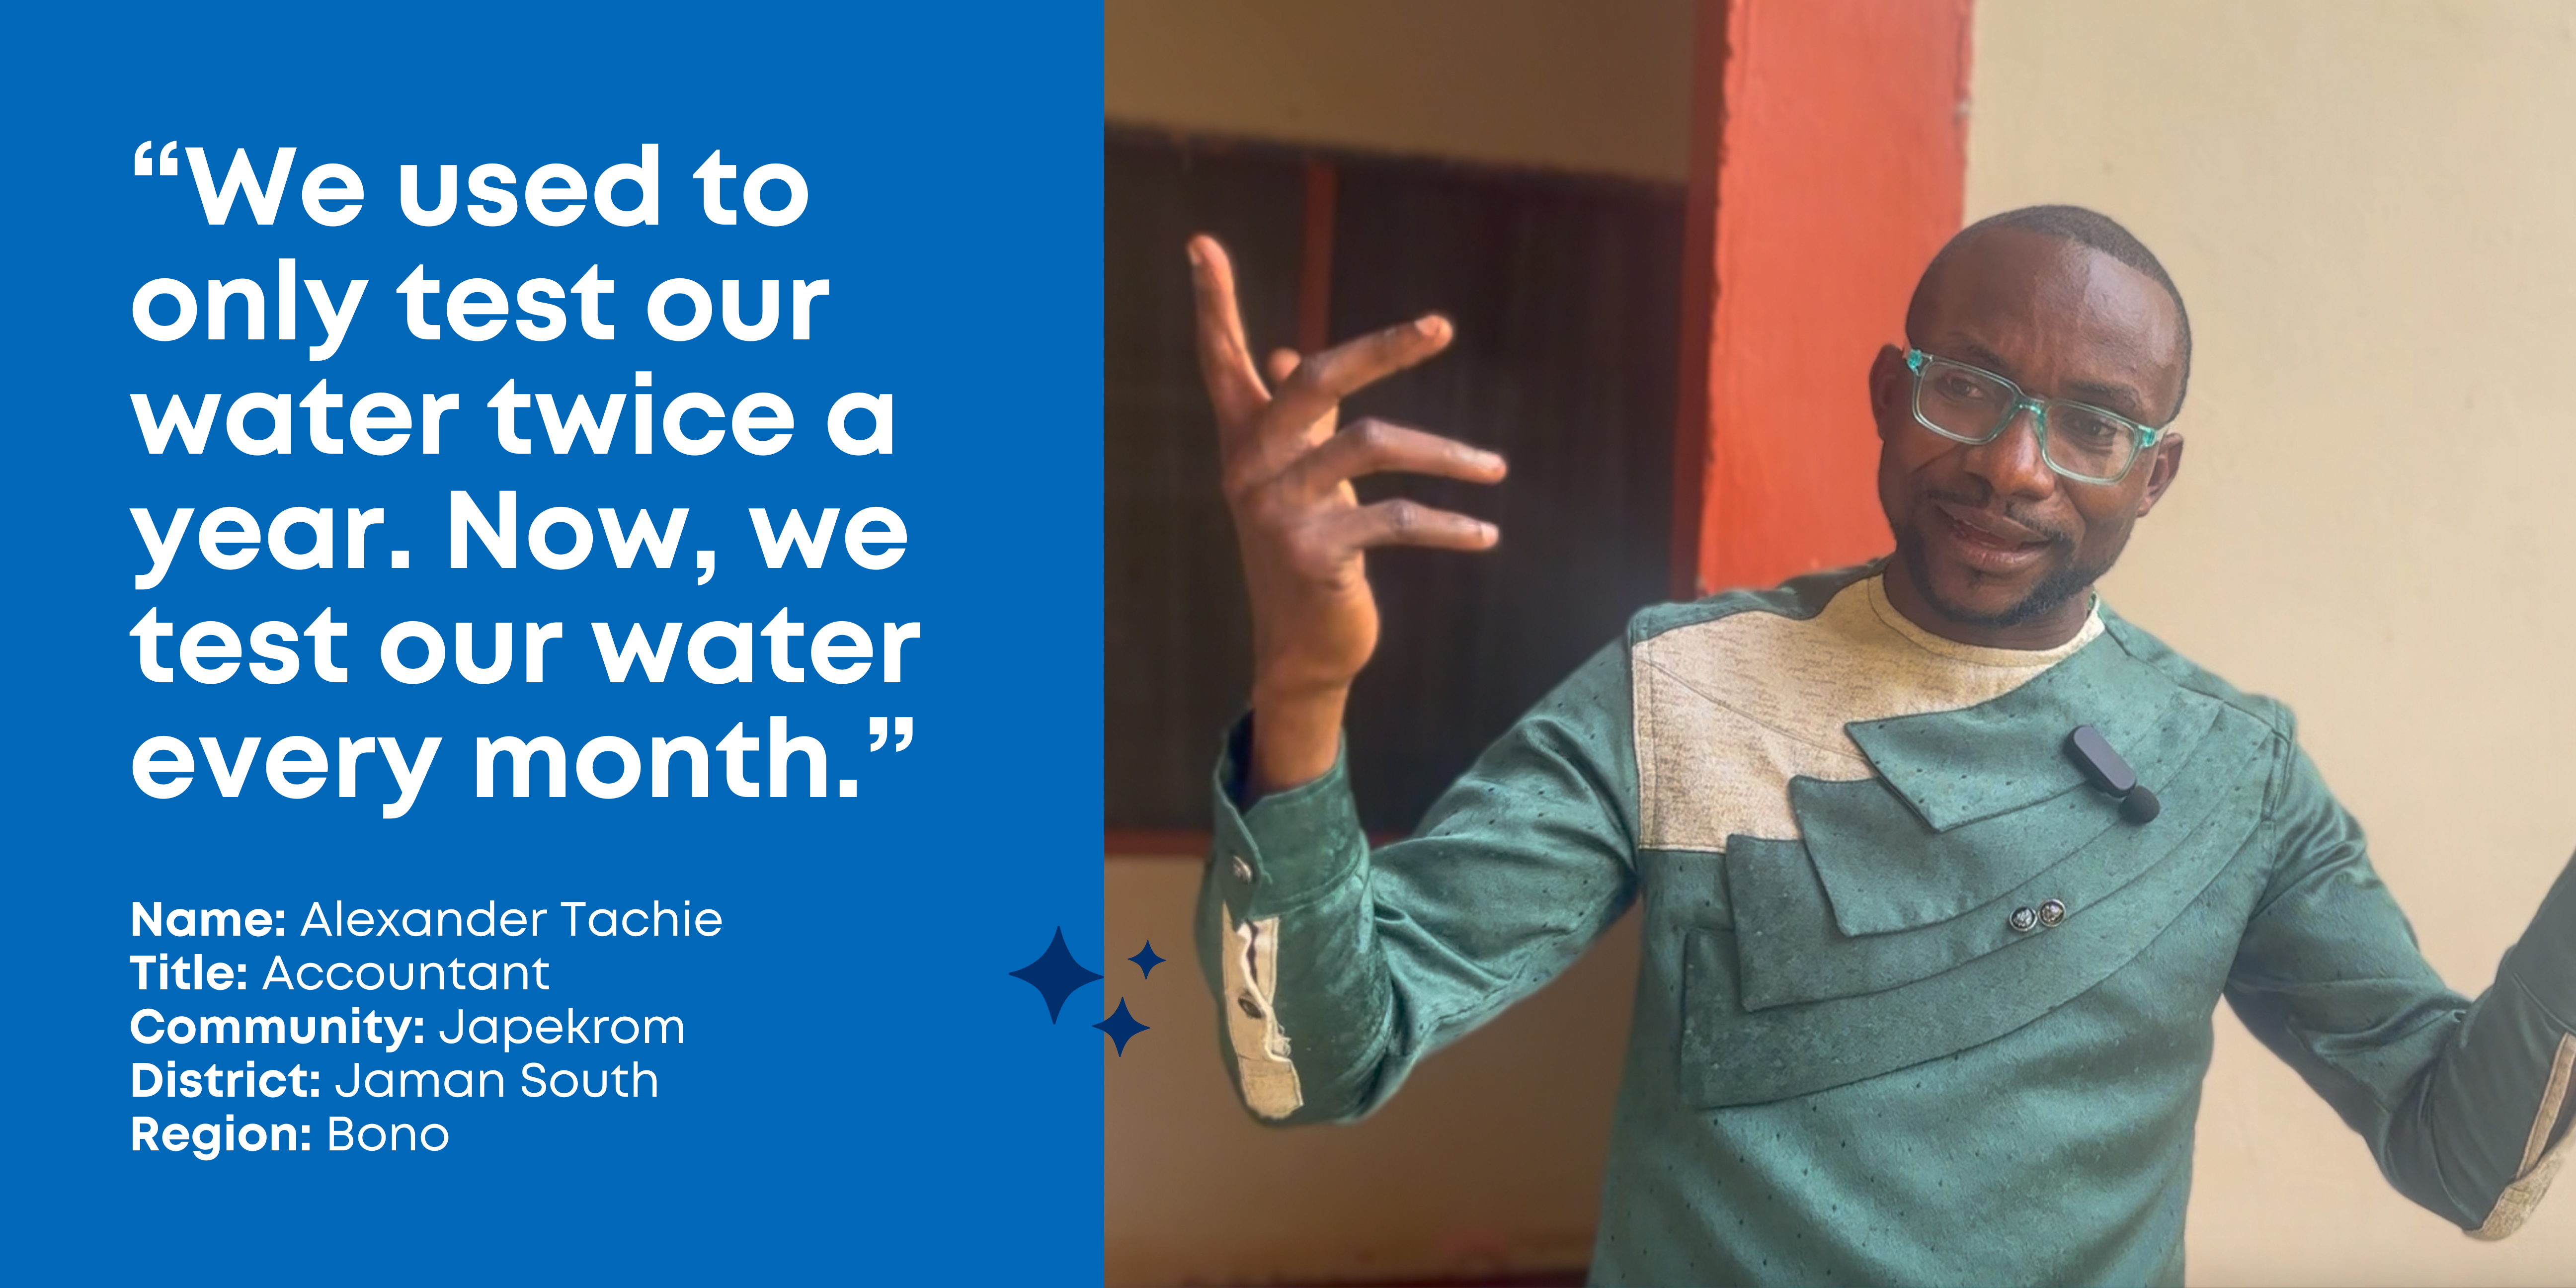 Alexander Tachie, an accountant gestures with his hands while speaking: "We used to only test our water twice a year. Now, we test our water every month." Jaman South, Bono, Ghana